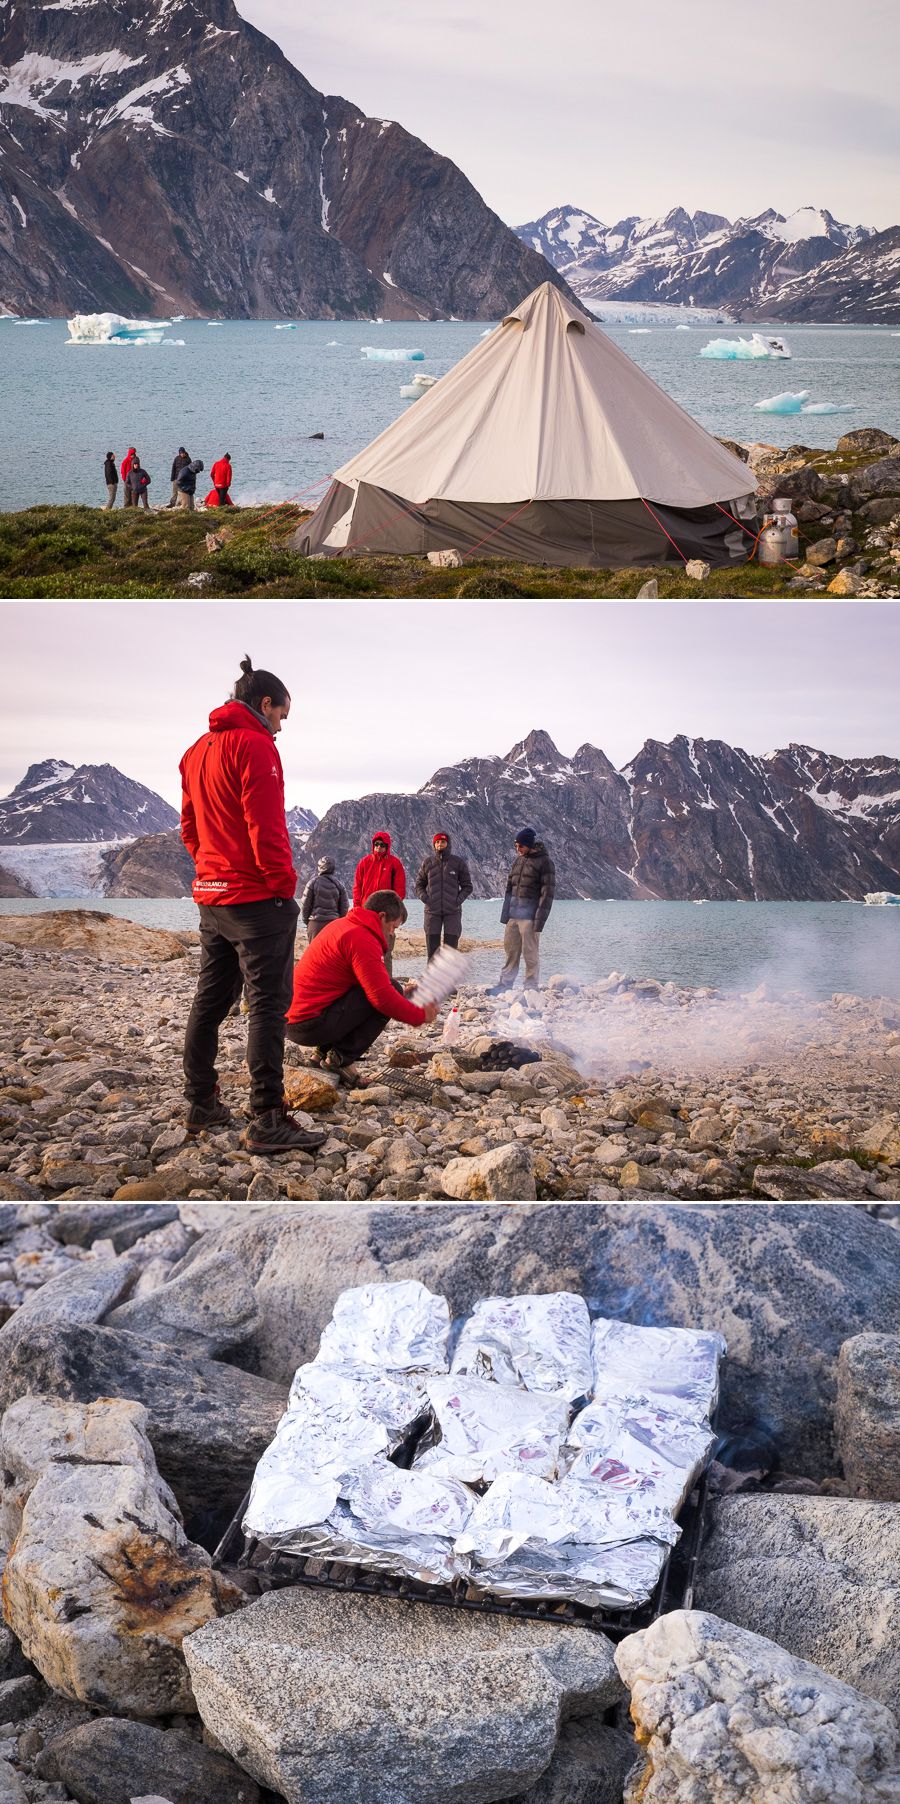 Cooking dinner on the shore of the Karale fjord at our first campsite on the Unplugged Wilderness Trek